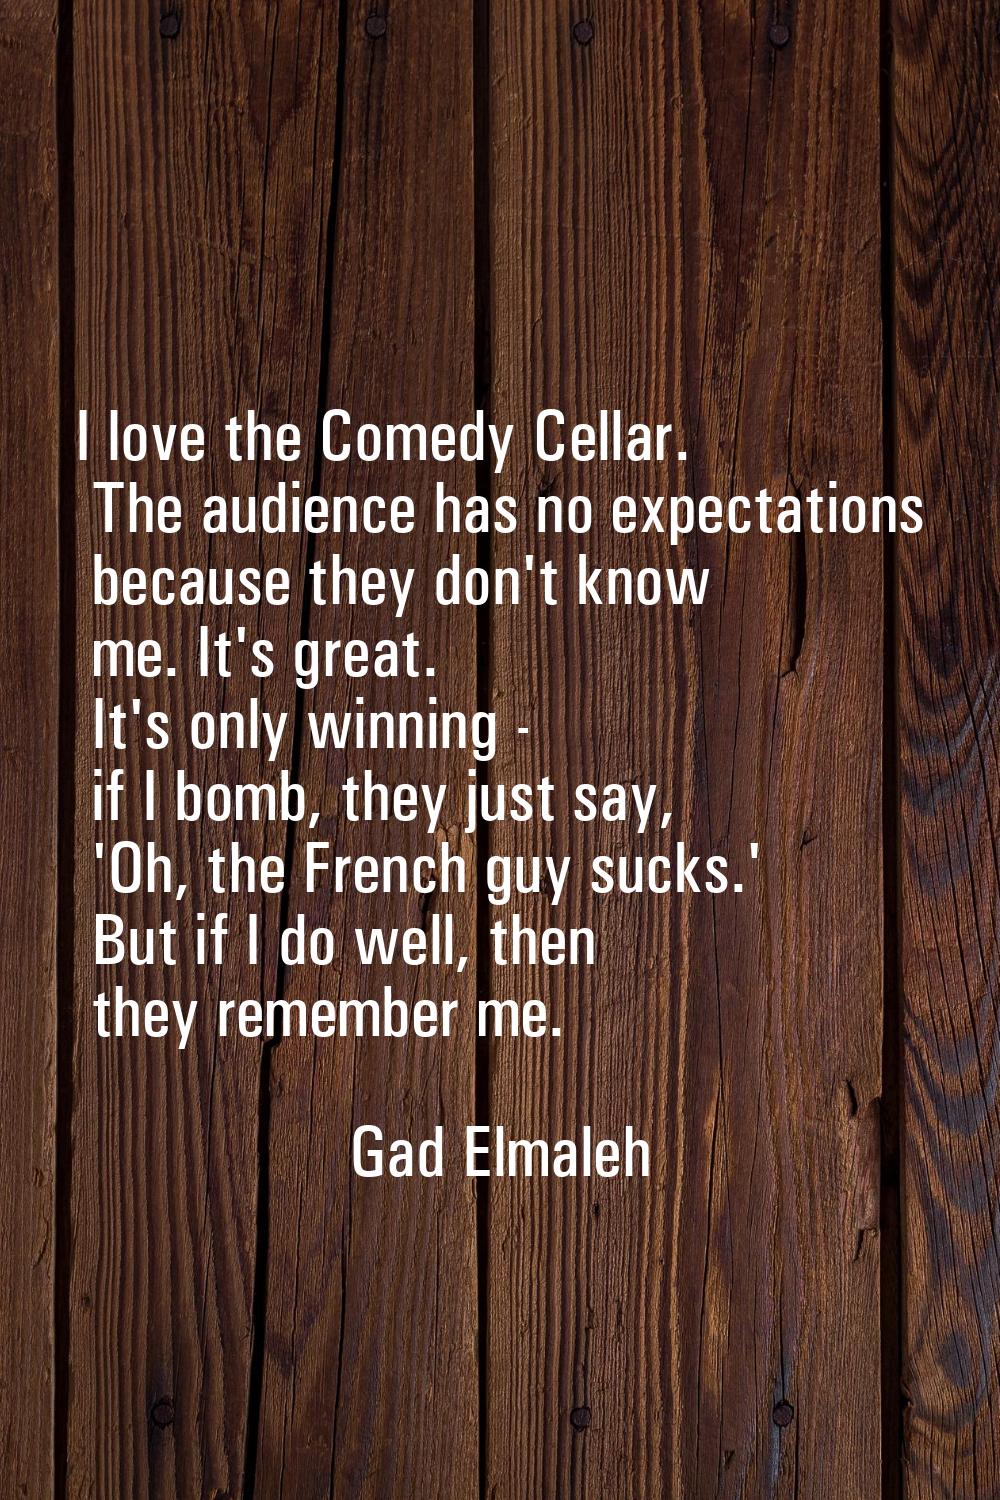 I love the Comedy Cellar. The audience has no expectations because they don't know me. It's great. 